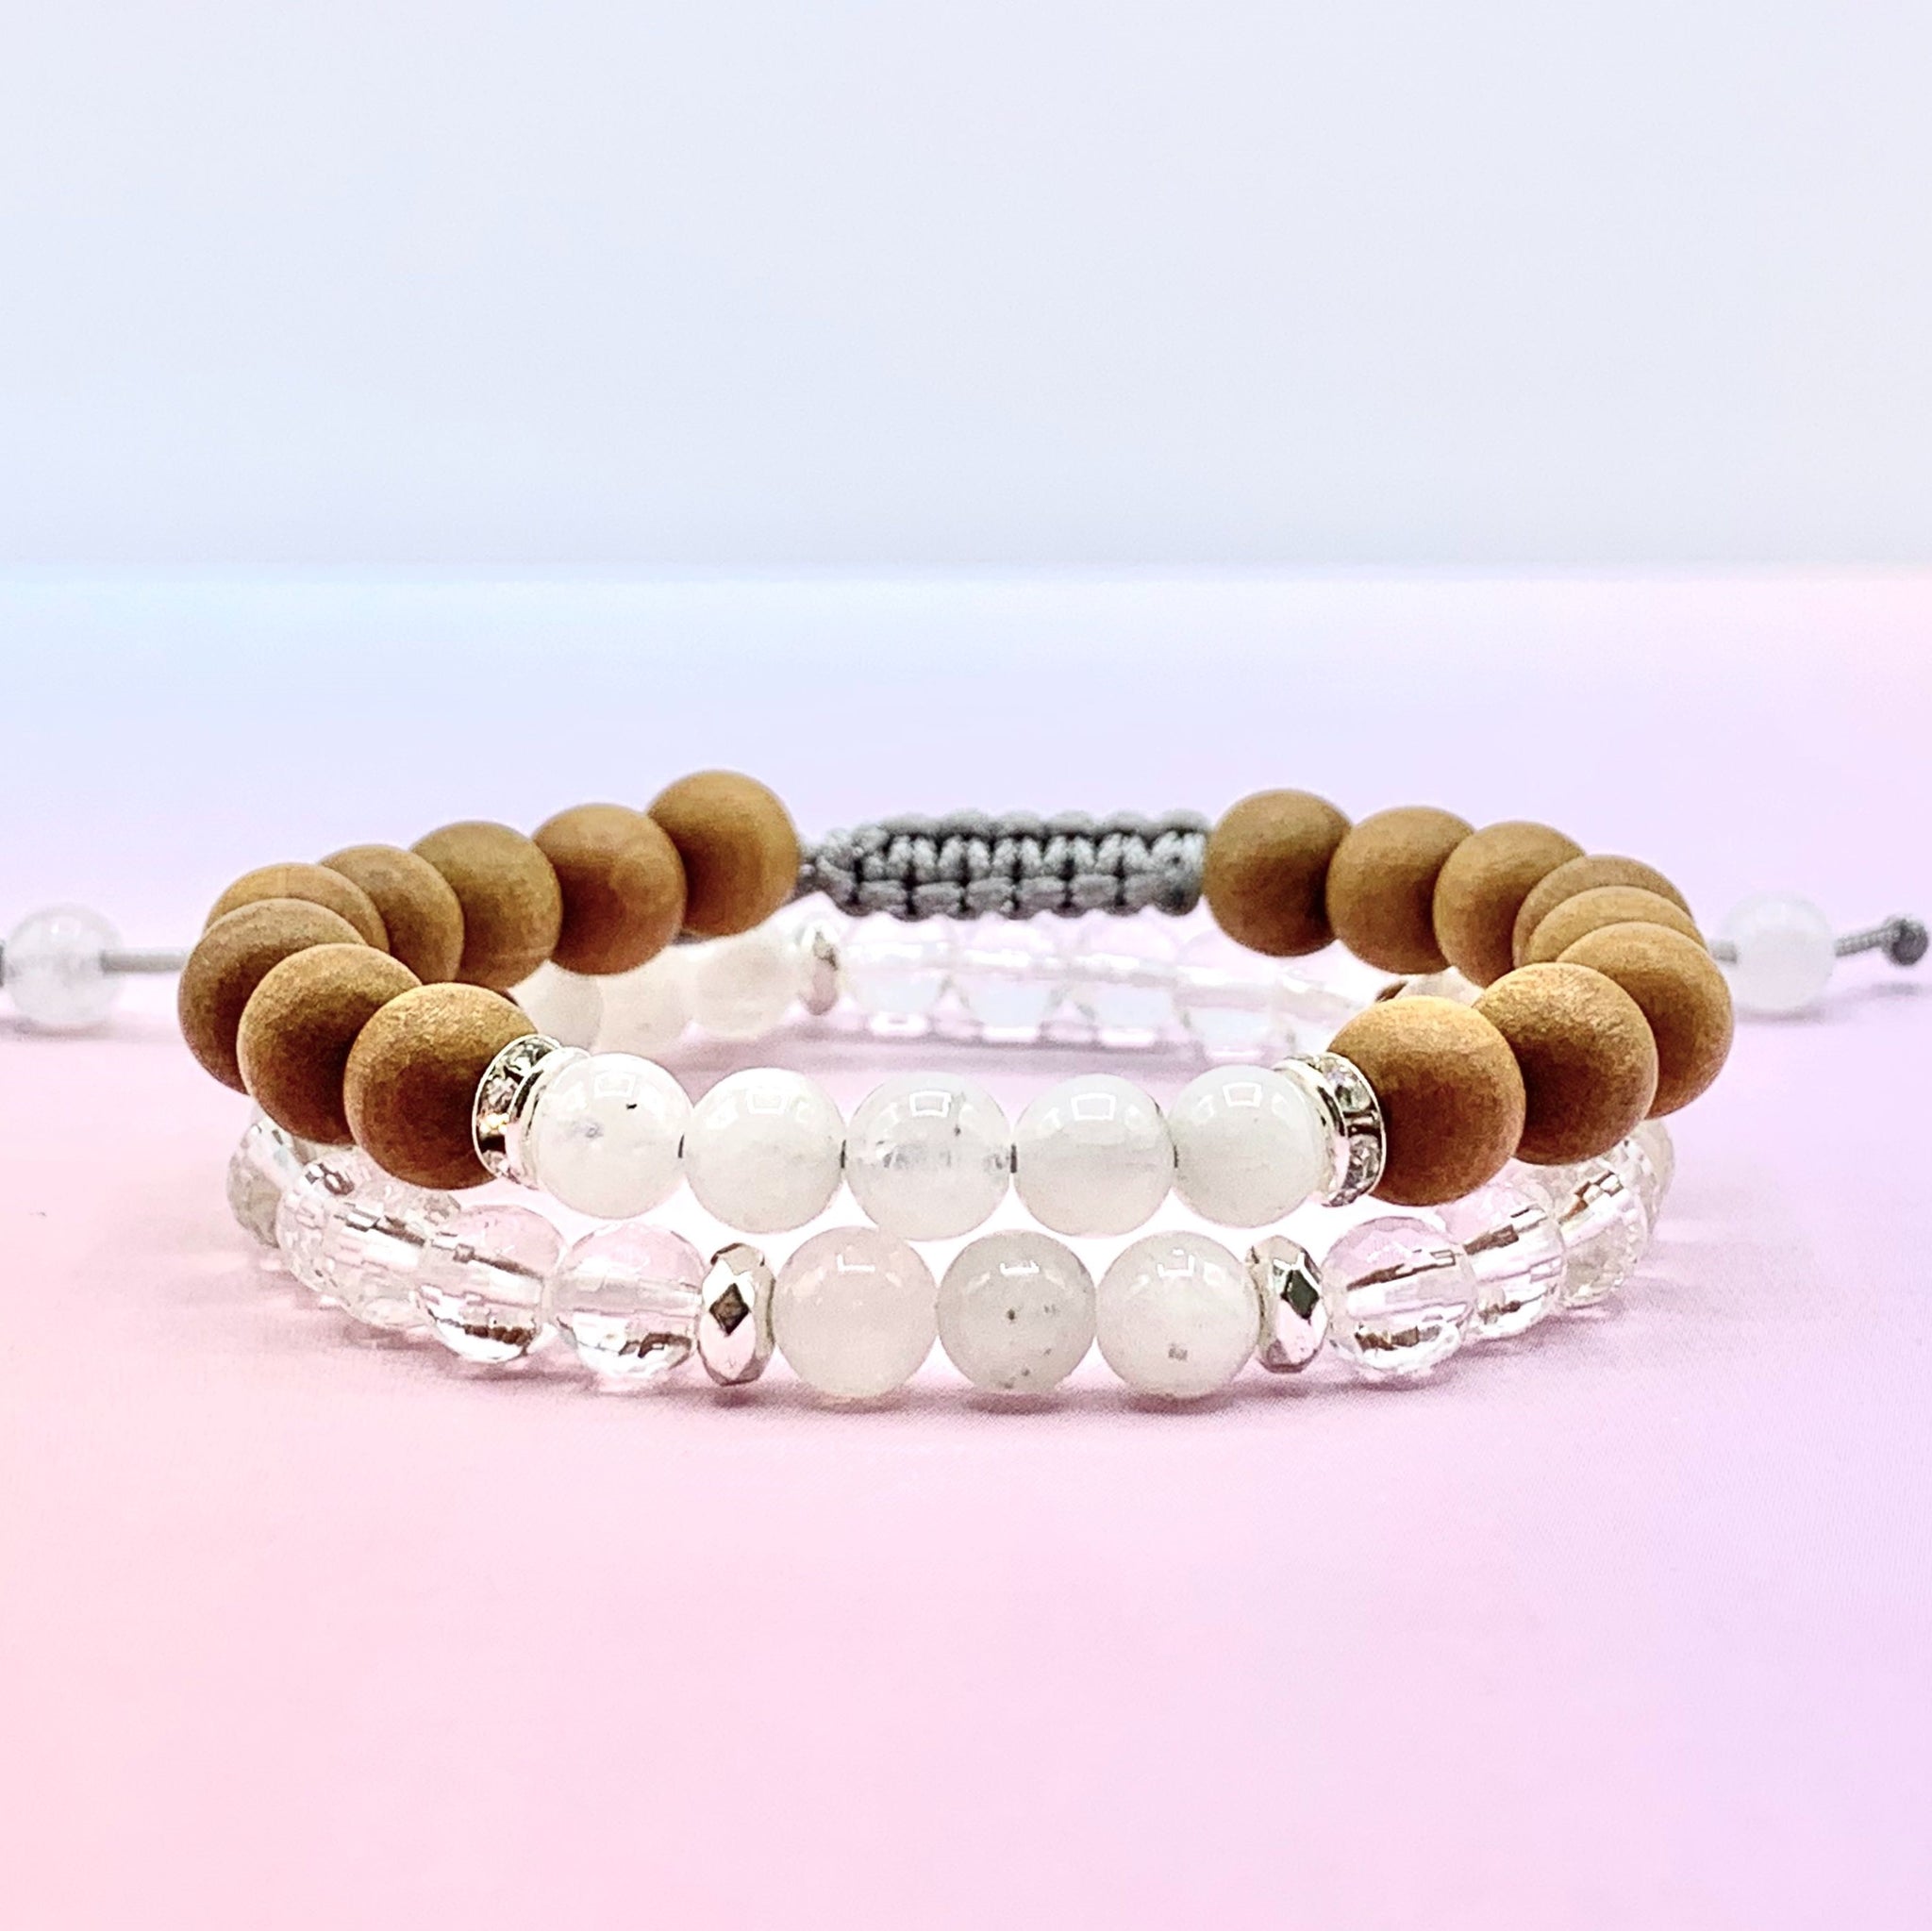 Daughter of the Moon Bracelet Stack.